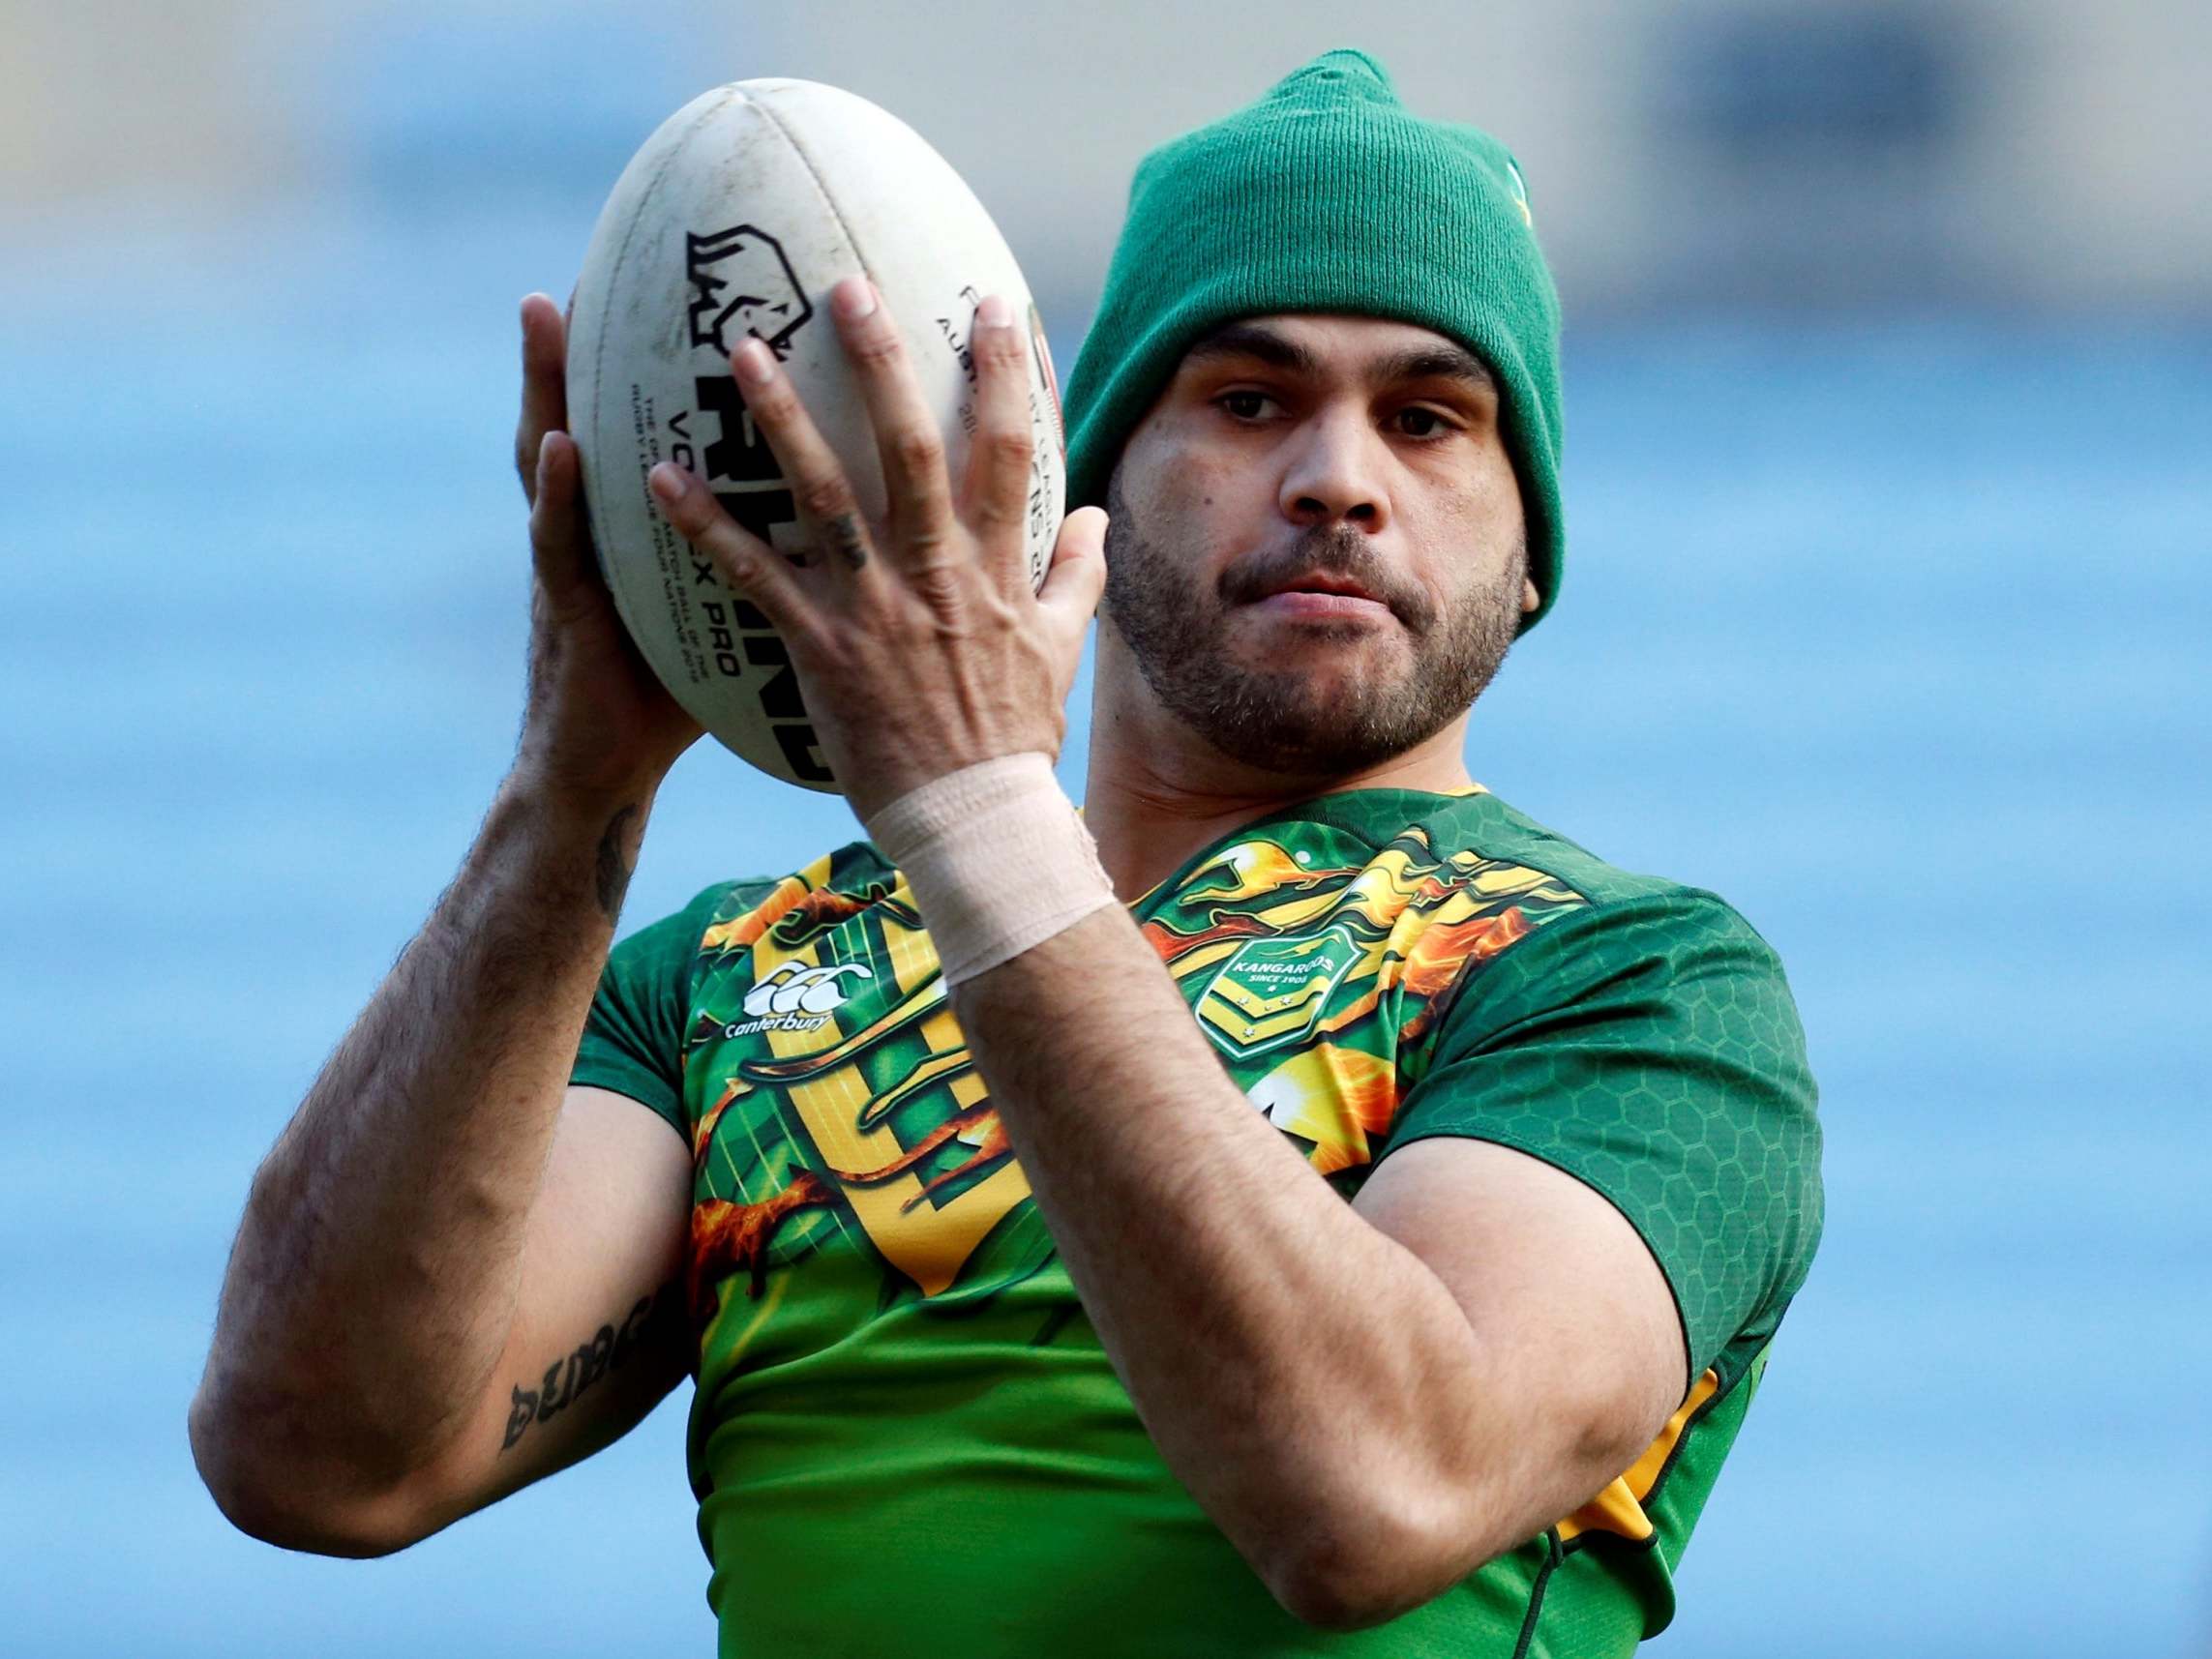 Greg Inglis attempted to continue his career but injuries forced him to retire